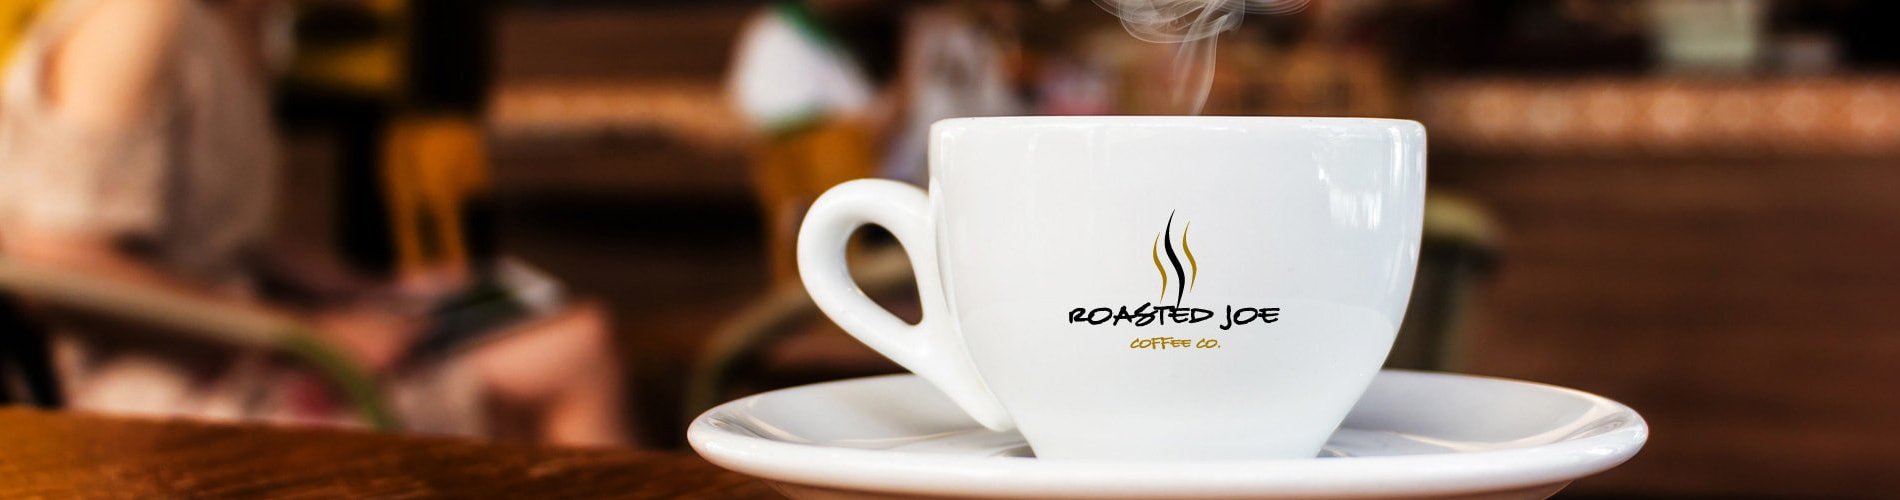 Office Coffee  Service for businesses in 7 county metro area of the Twin Cities, Minnesota by Roasted Joe Coffee Co.